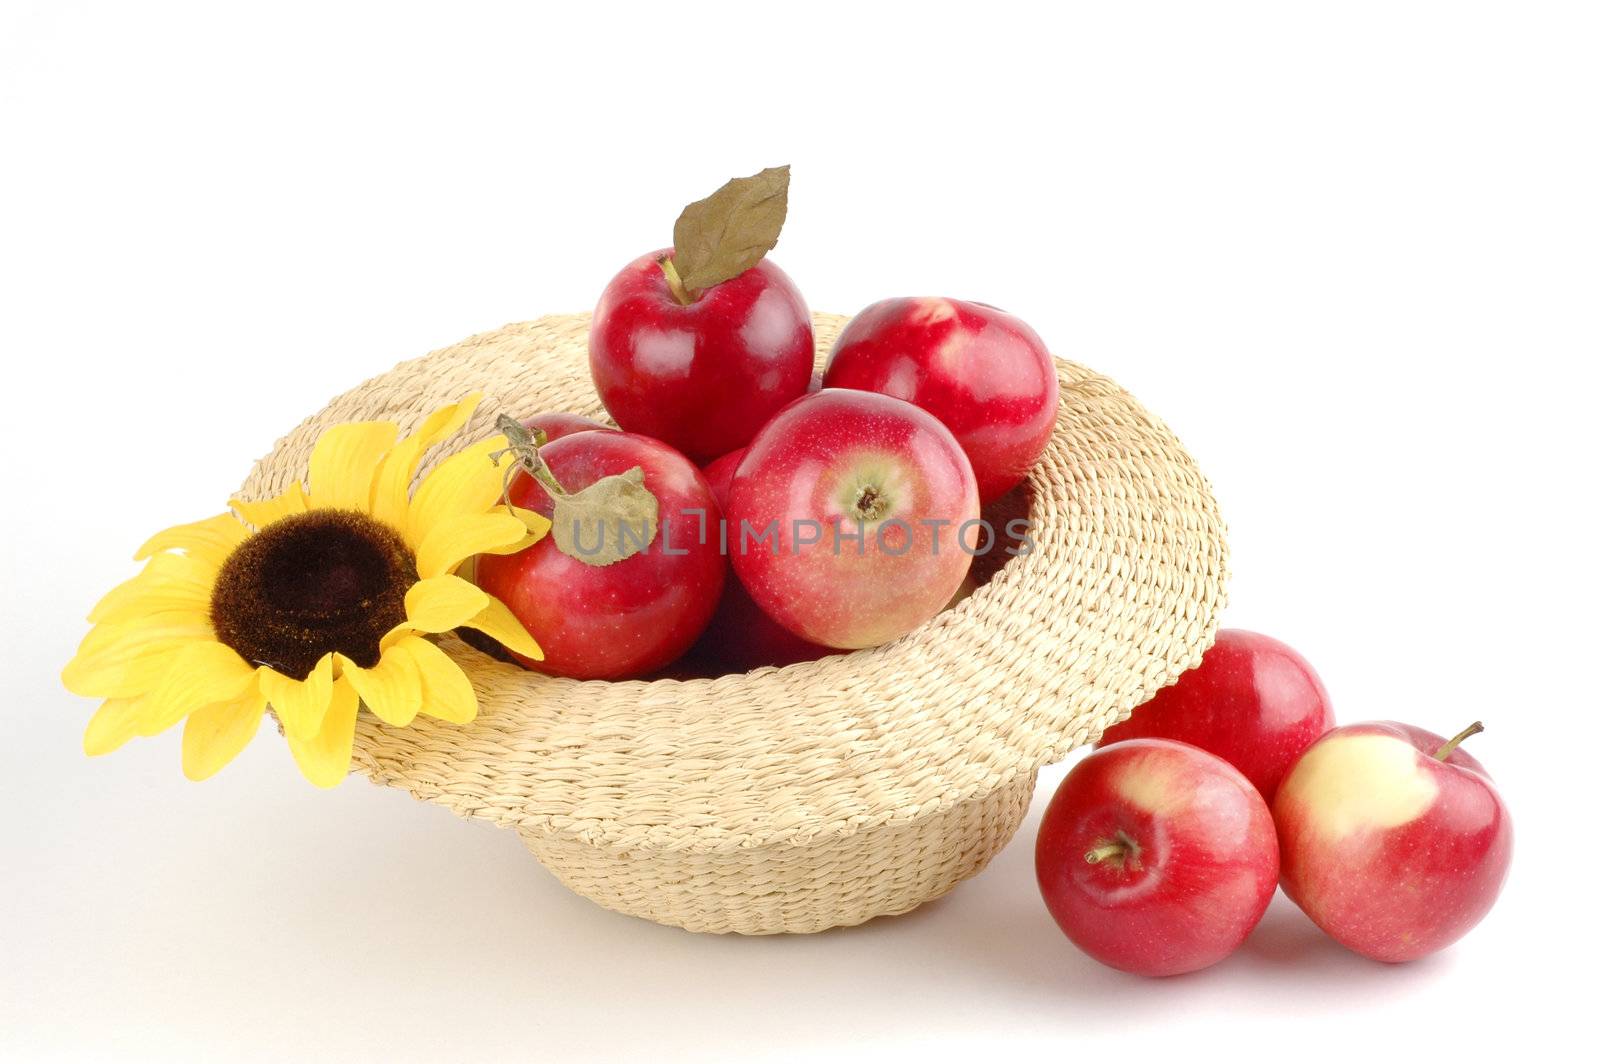 Freshly picked macintosh apples in a straw hat.